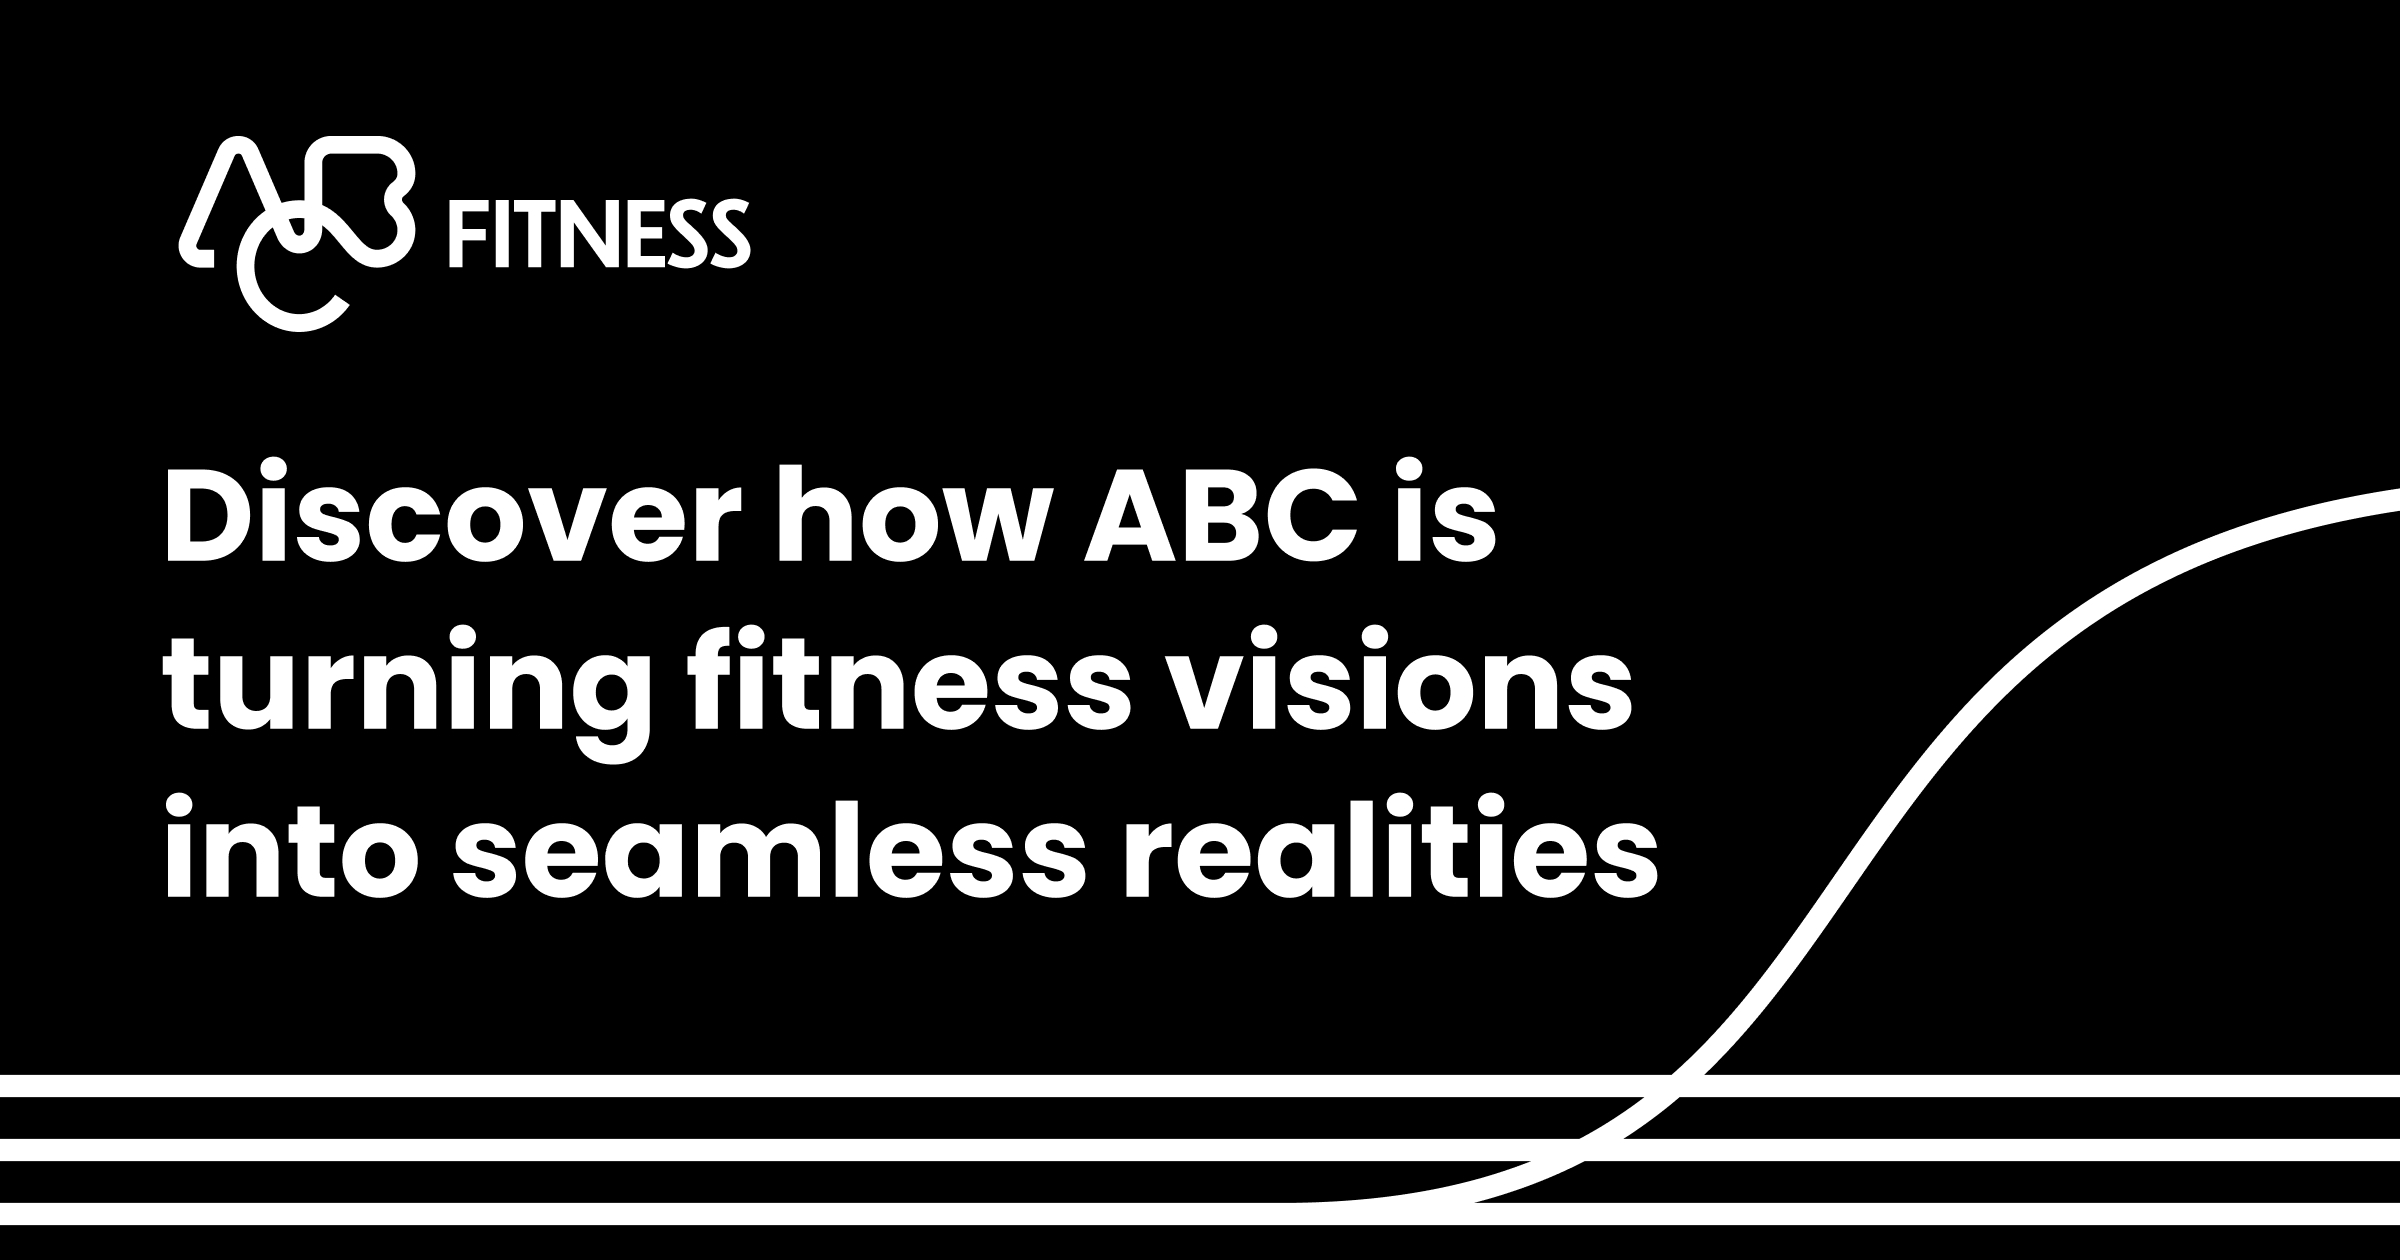 ABC Fitness - discover how abc fitness is turning fitness visions into seamless realities